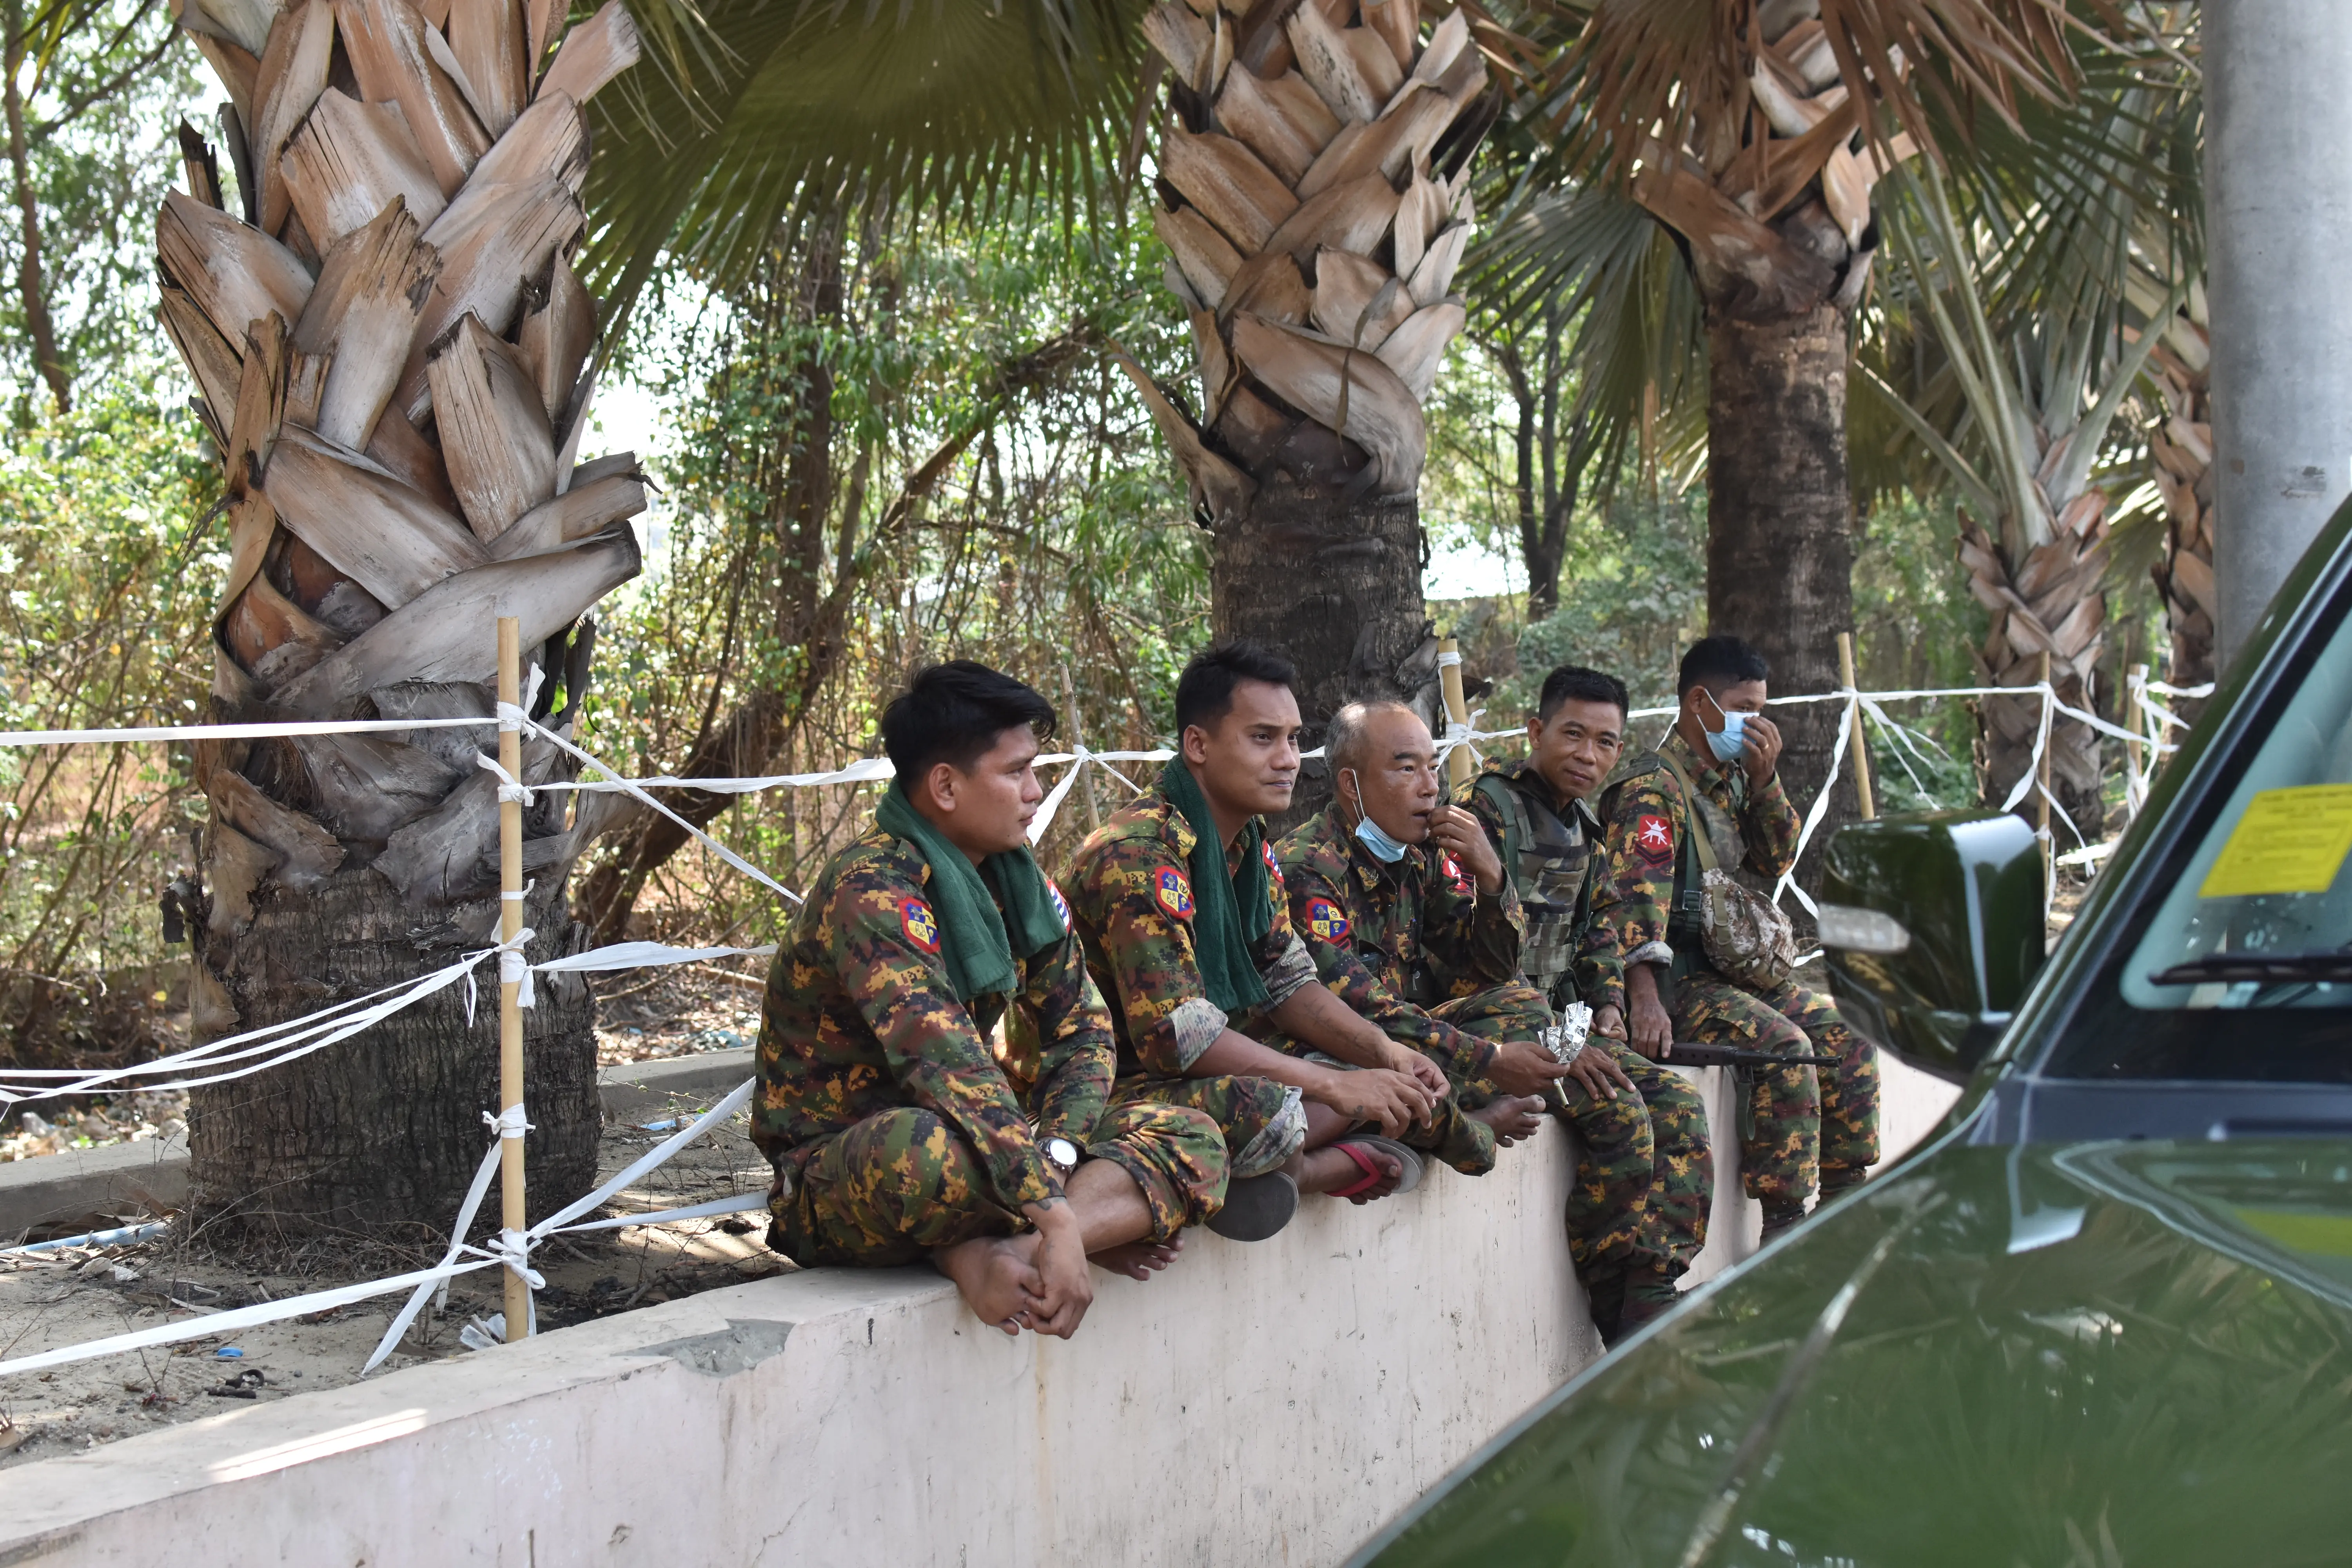 Soldiers sit on a wall in front of palm trees.